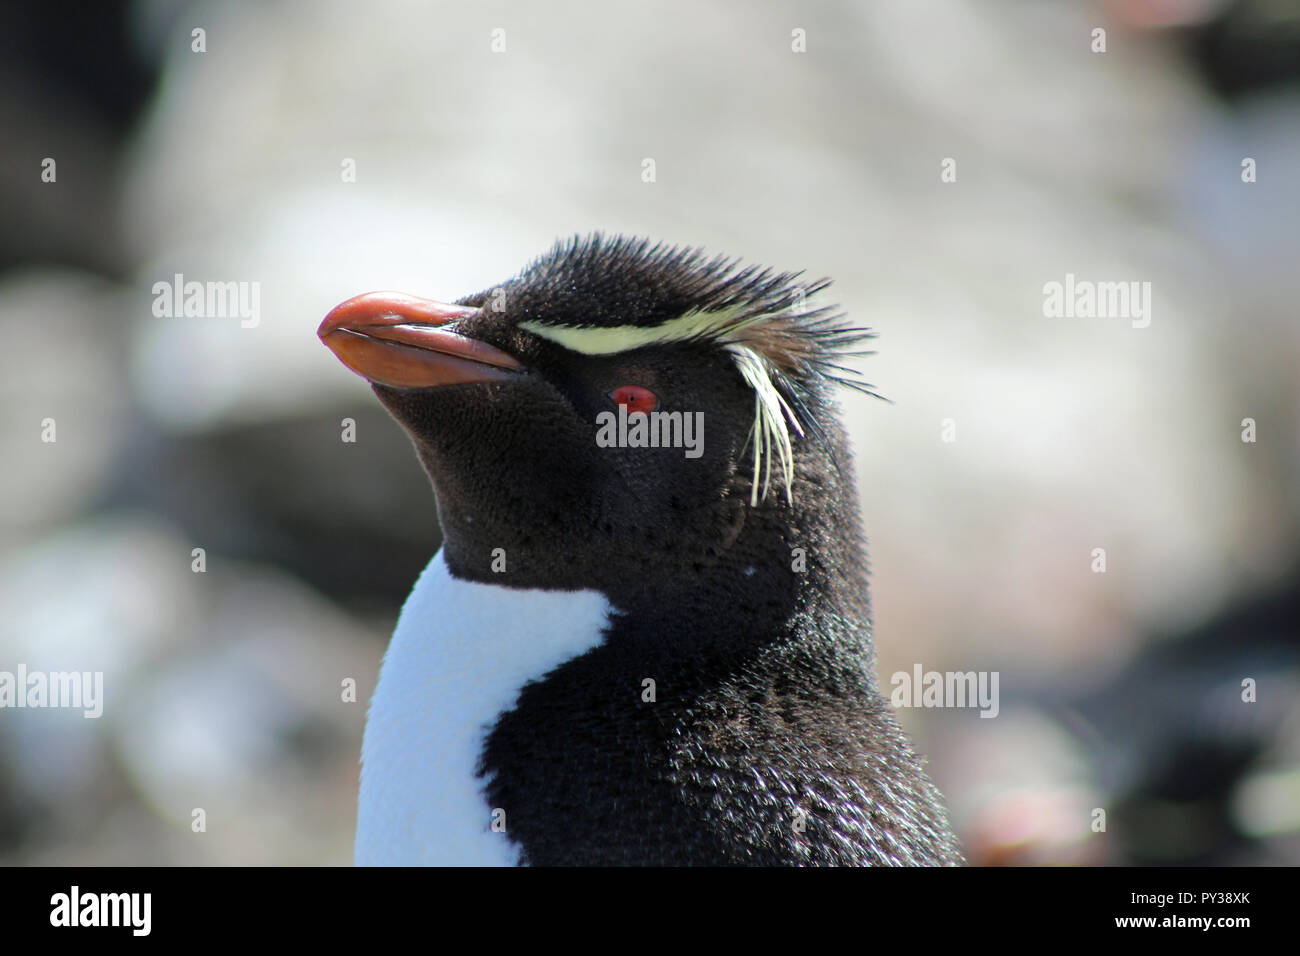 Rockhopper penguin close-up profile portrait, Falkland Islands, South Atlantic with its stunning plumage and piercing red eye Stock Photo